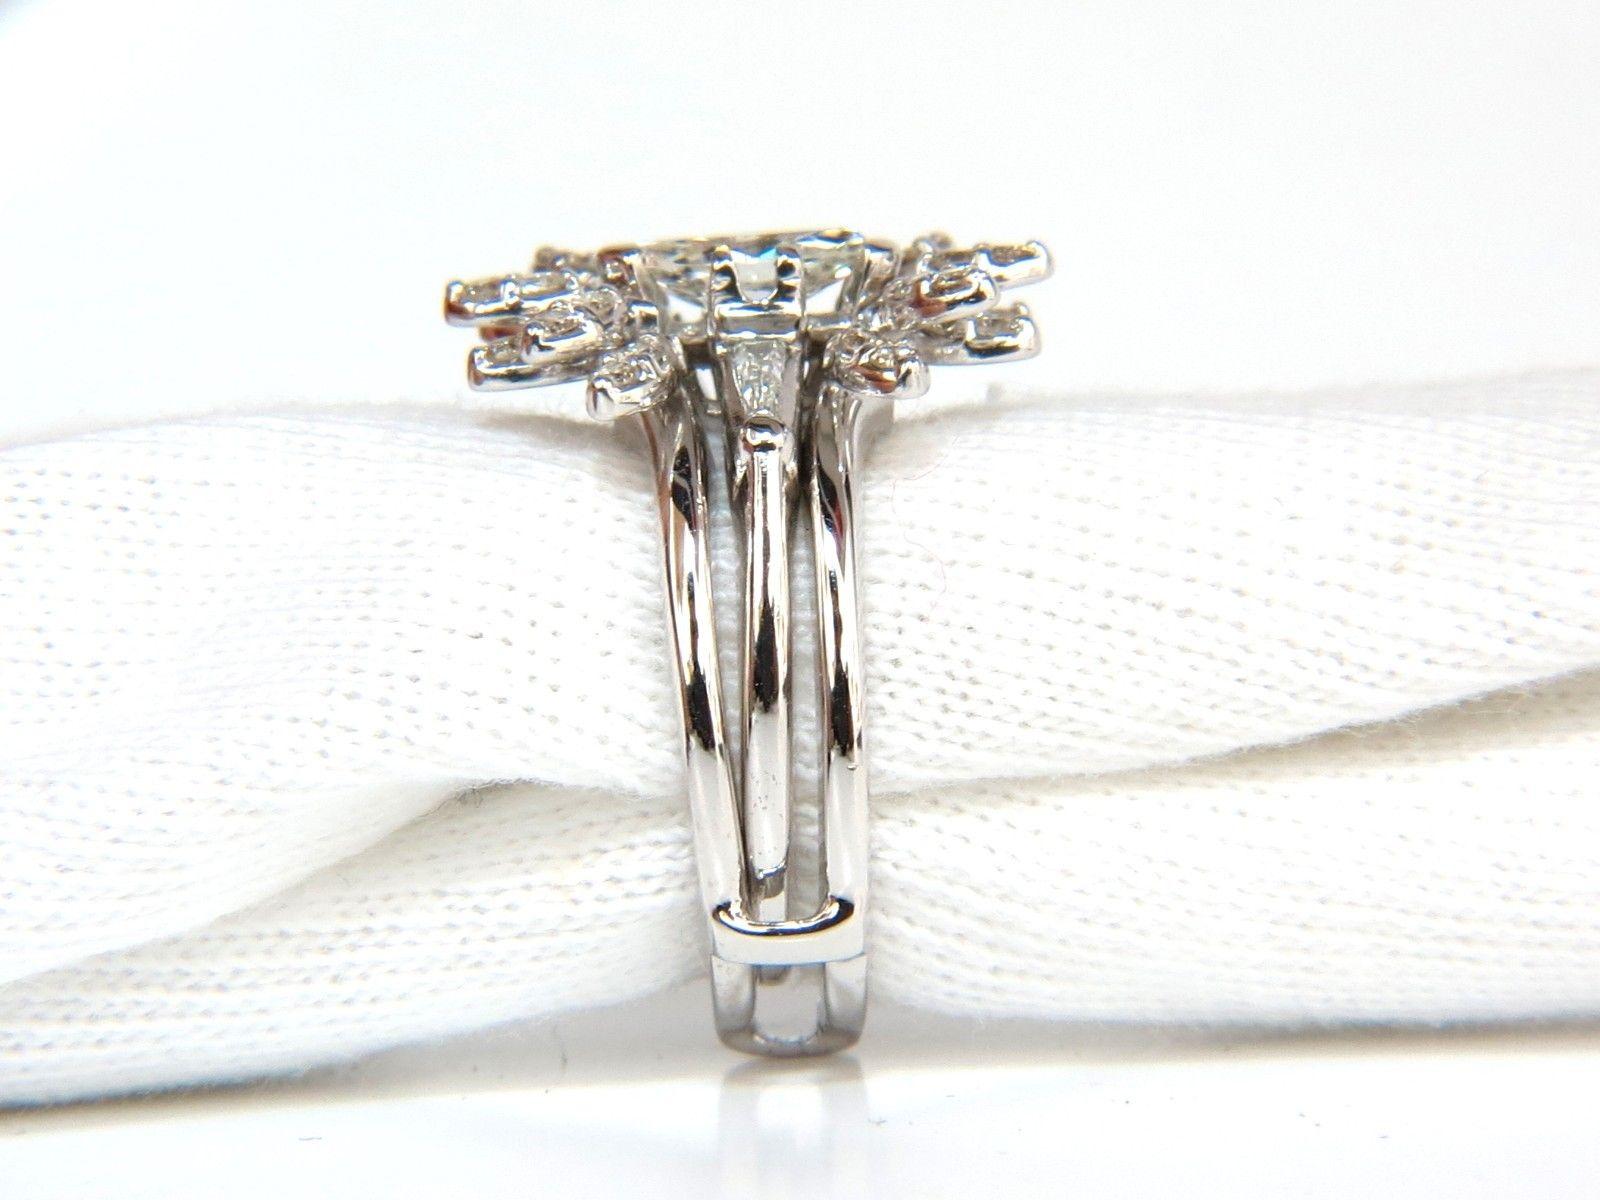 .60ct. Marquise diamond

Full cut brilliant

Obsolete sparkle and scintillation.

H-color

Vs-2 clarity.

7.5 X 4.6mm



Side, (2) baguette diamonds:

.30ct. 

H-color Vs-2 clarity.

Platinum Mount.

Ring size: 6



Insert / jacket diamond